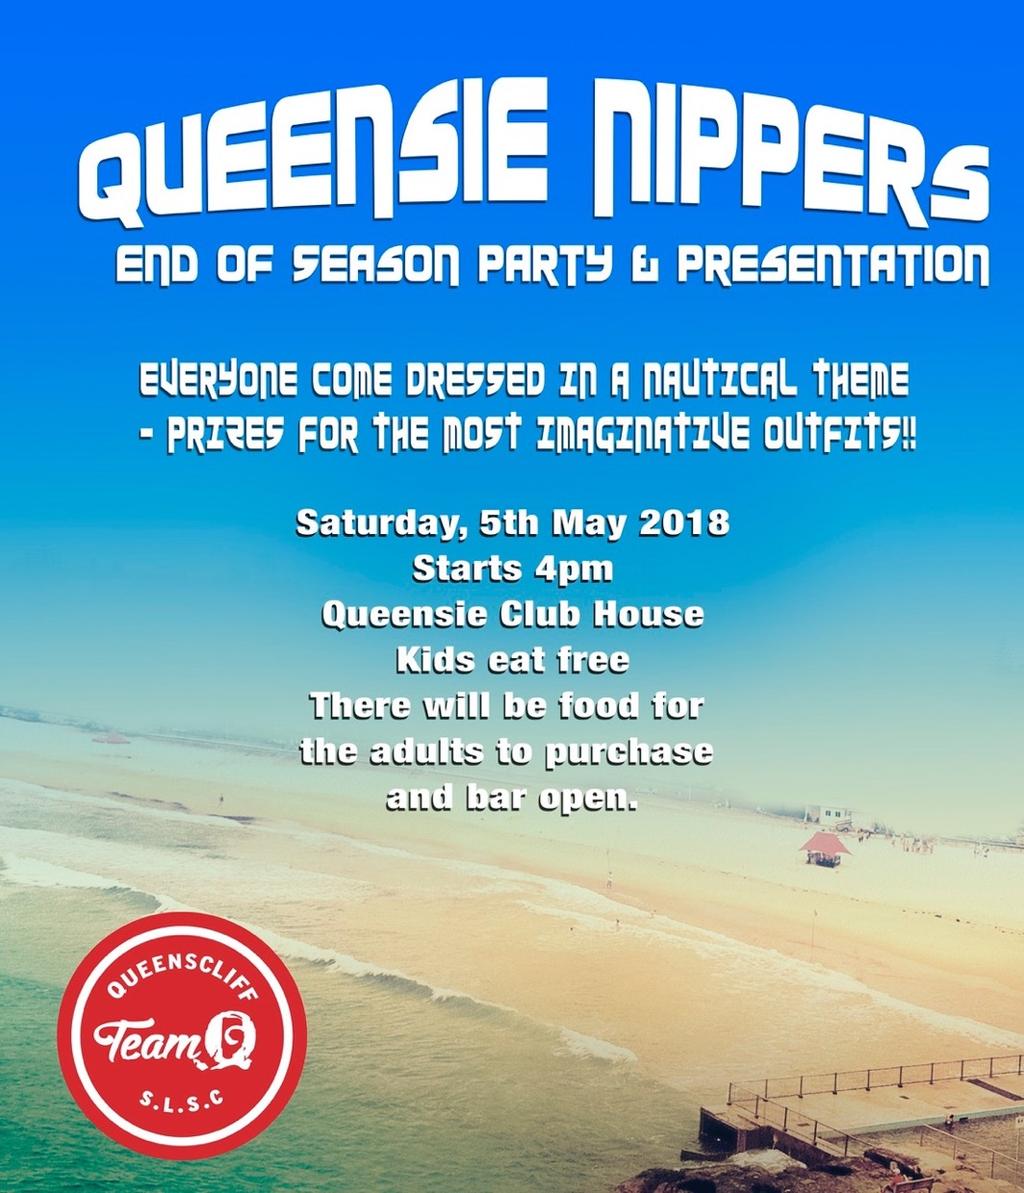 Nippers WRAP UP PARTY... RSVP - Nipper End of Season Party & Presentation - Looking forward to seeing everyone on Sat May 5 at 4pm.